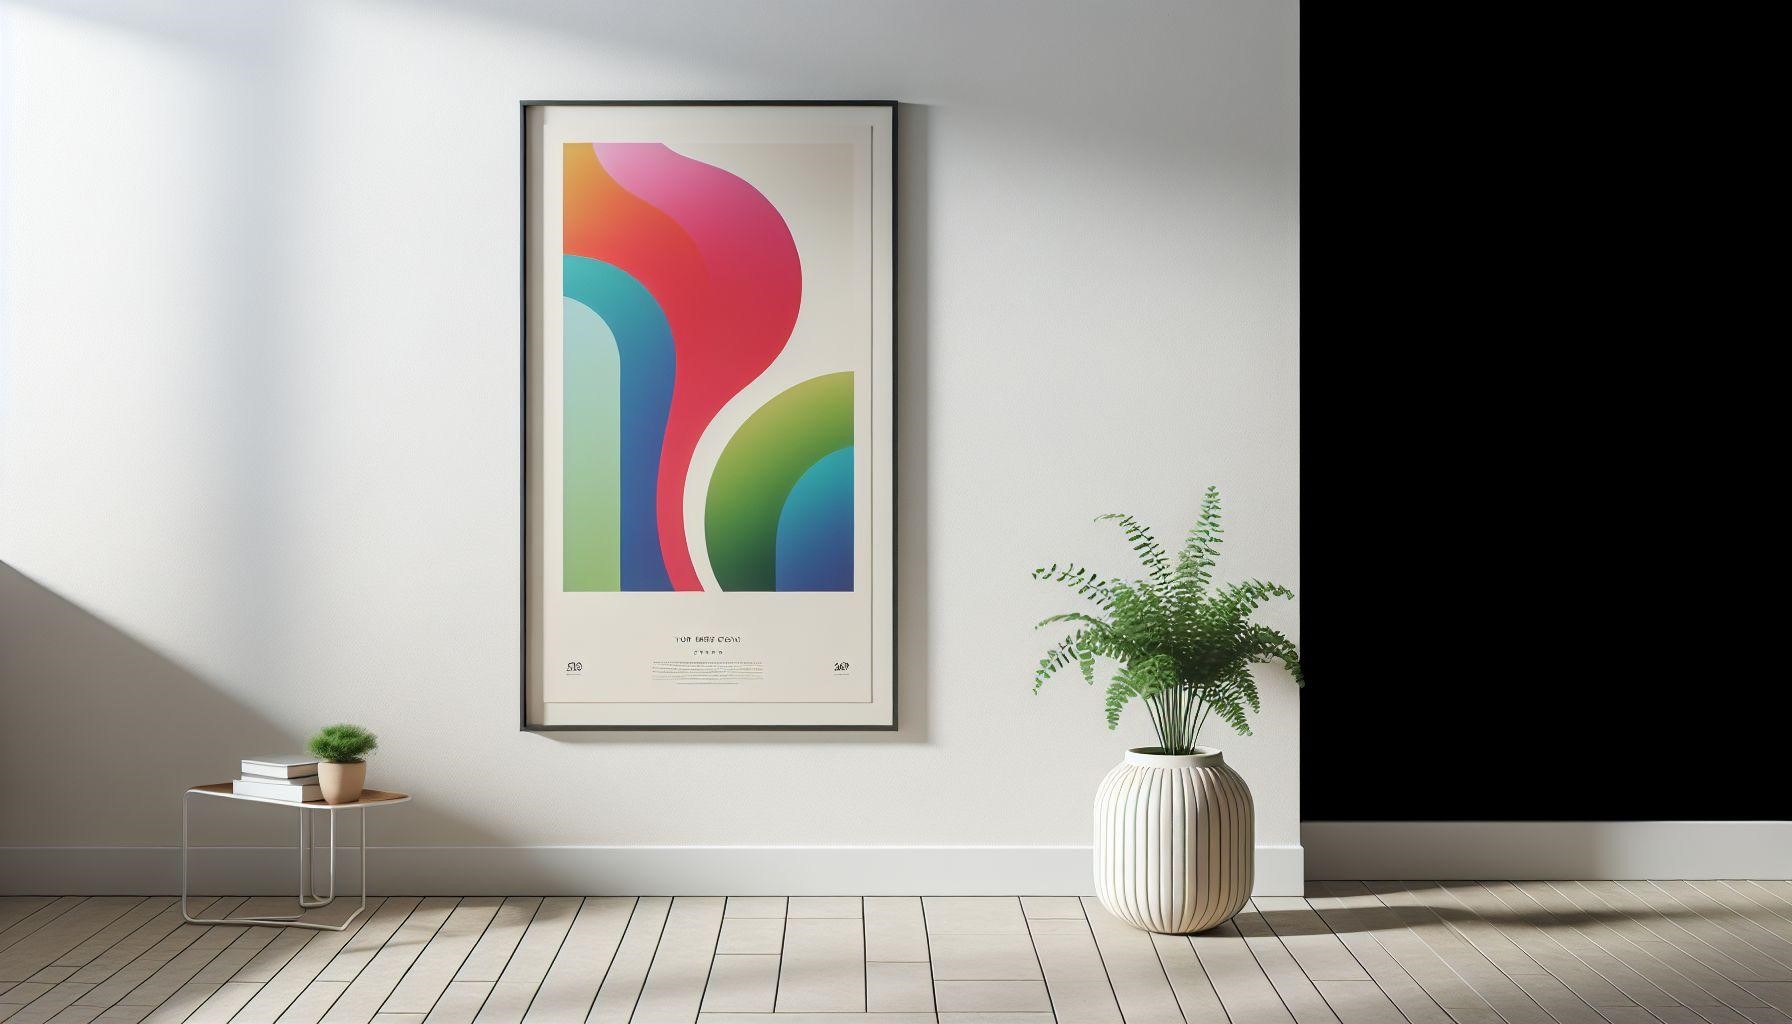 How posters redefine home decor through personal expression and artistry